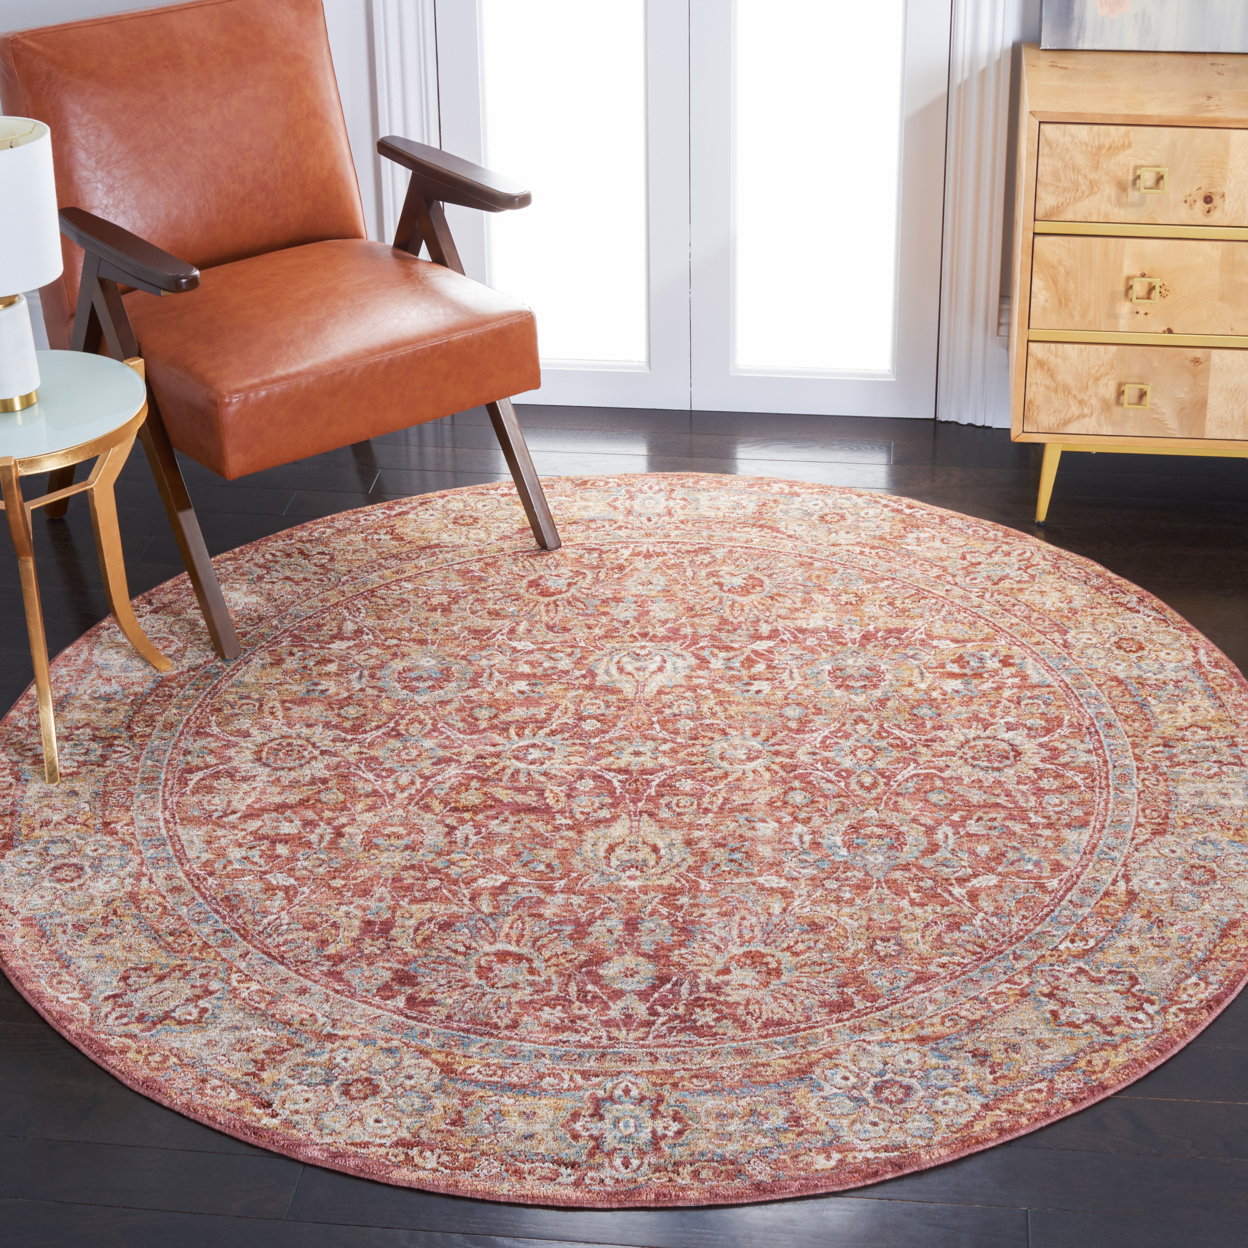 SAFAVIEH Valencia Collection VAL570P Rust / Teal Rug - 2' X 8'